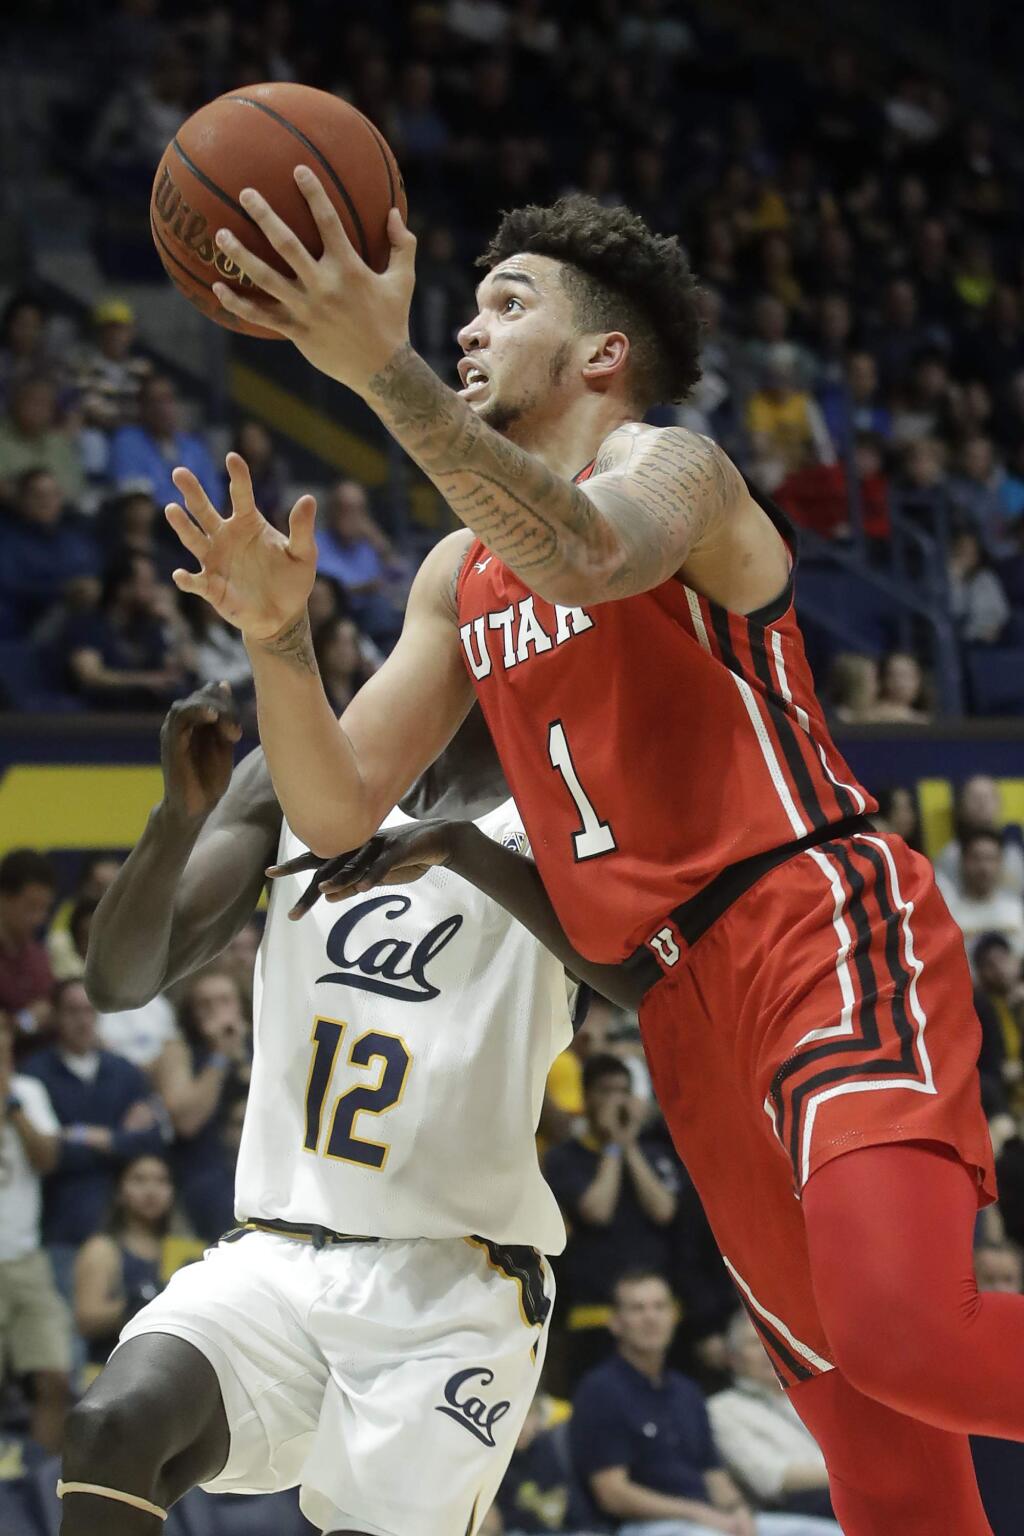 Utah forward Timmy Allen (1) shoots against Cal forward Kuany Kuany (12) during the first half in Berkeley, Saturday, Feb. 29, 2020. (AP Photo/Jeff Chiu)